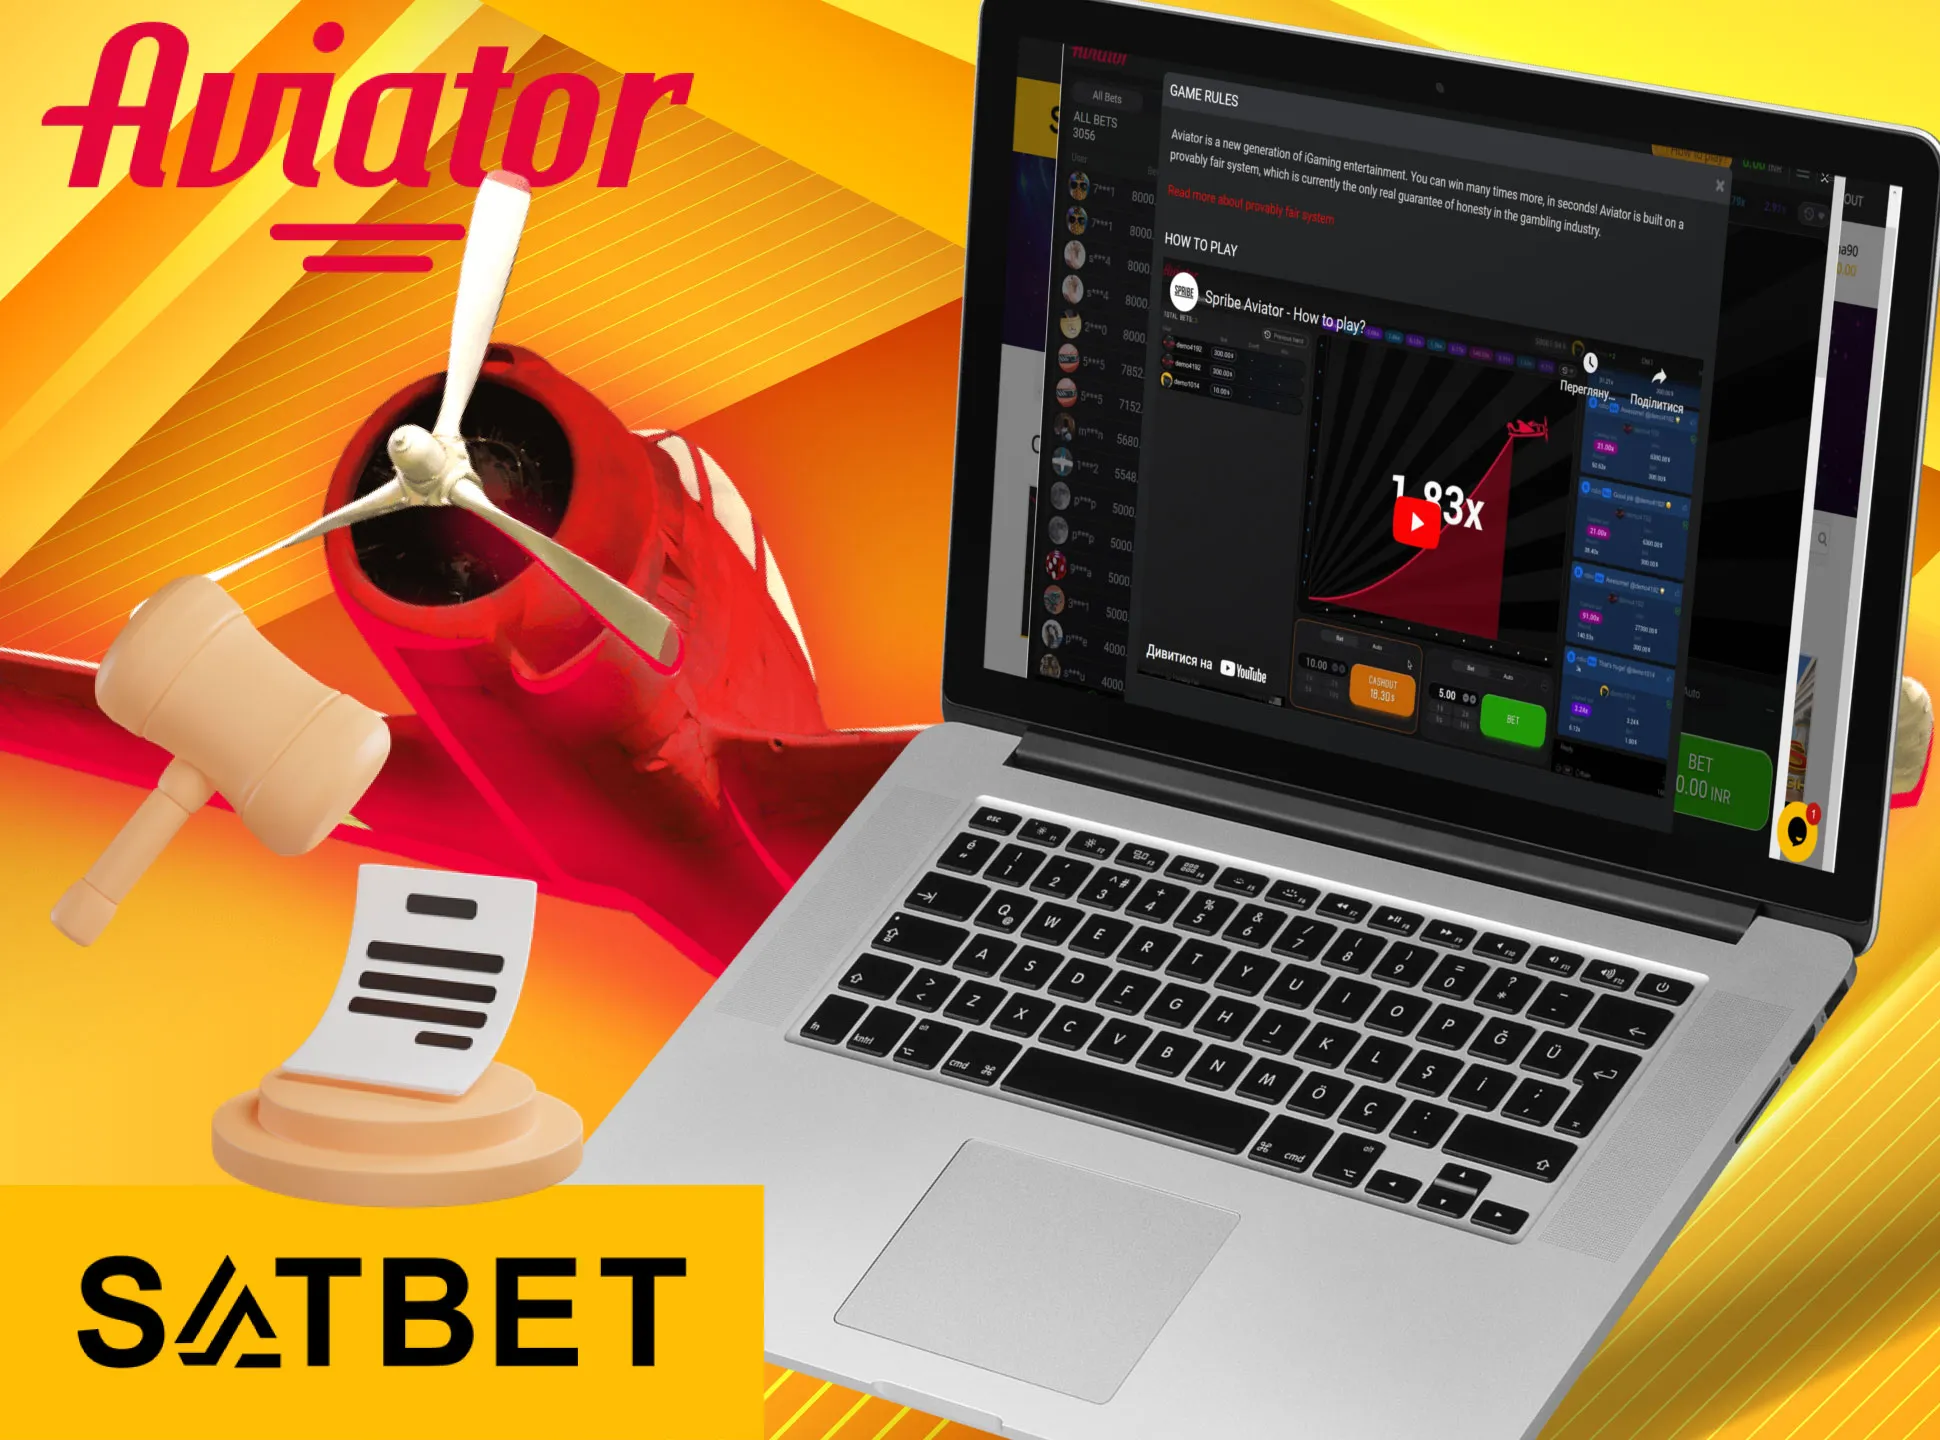 Follow special Aviator rules when playing it at the Satbet.